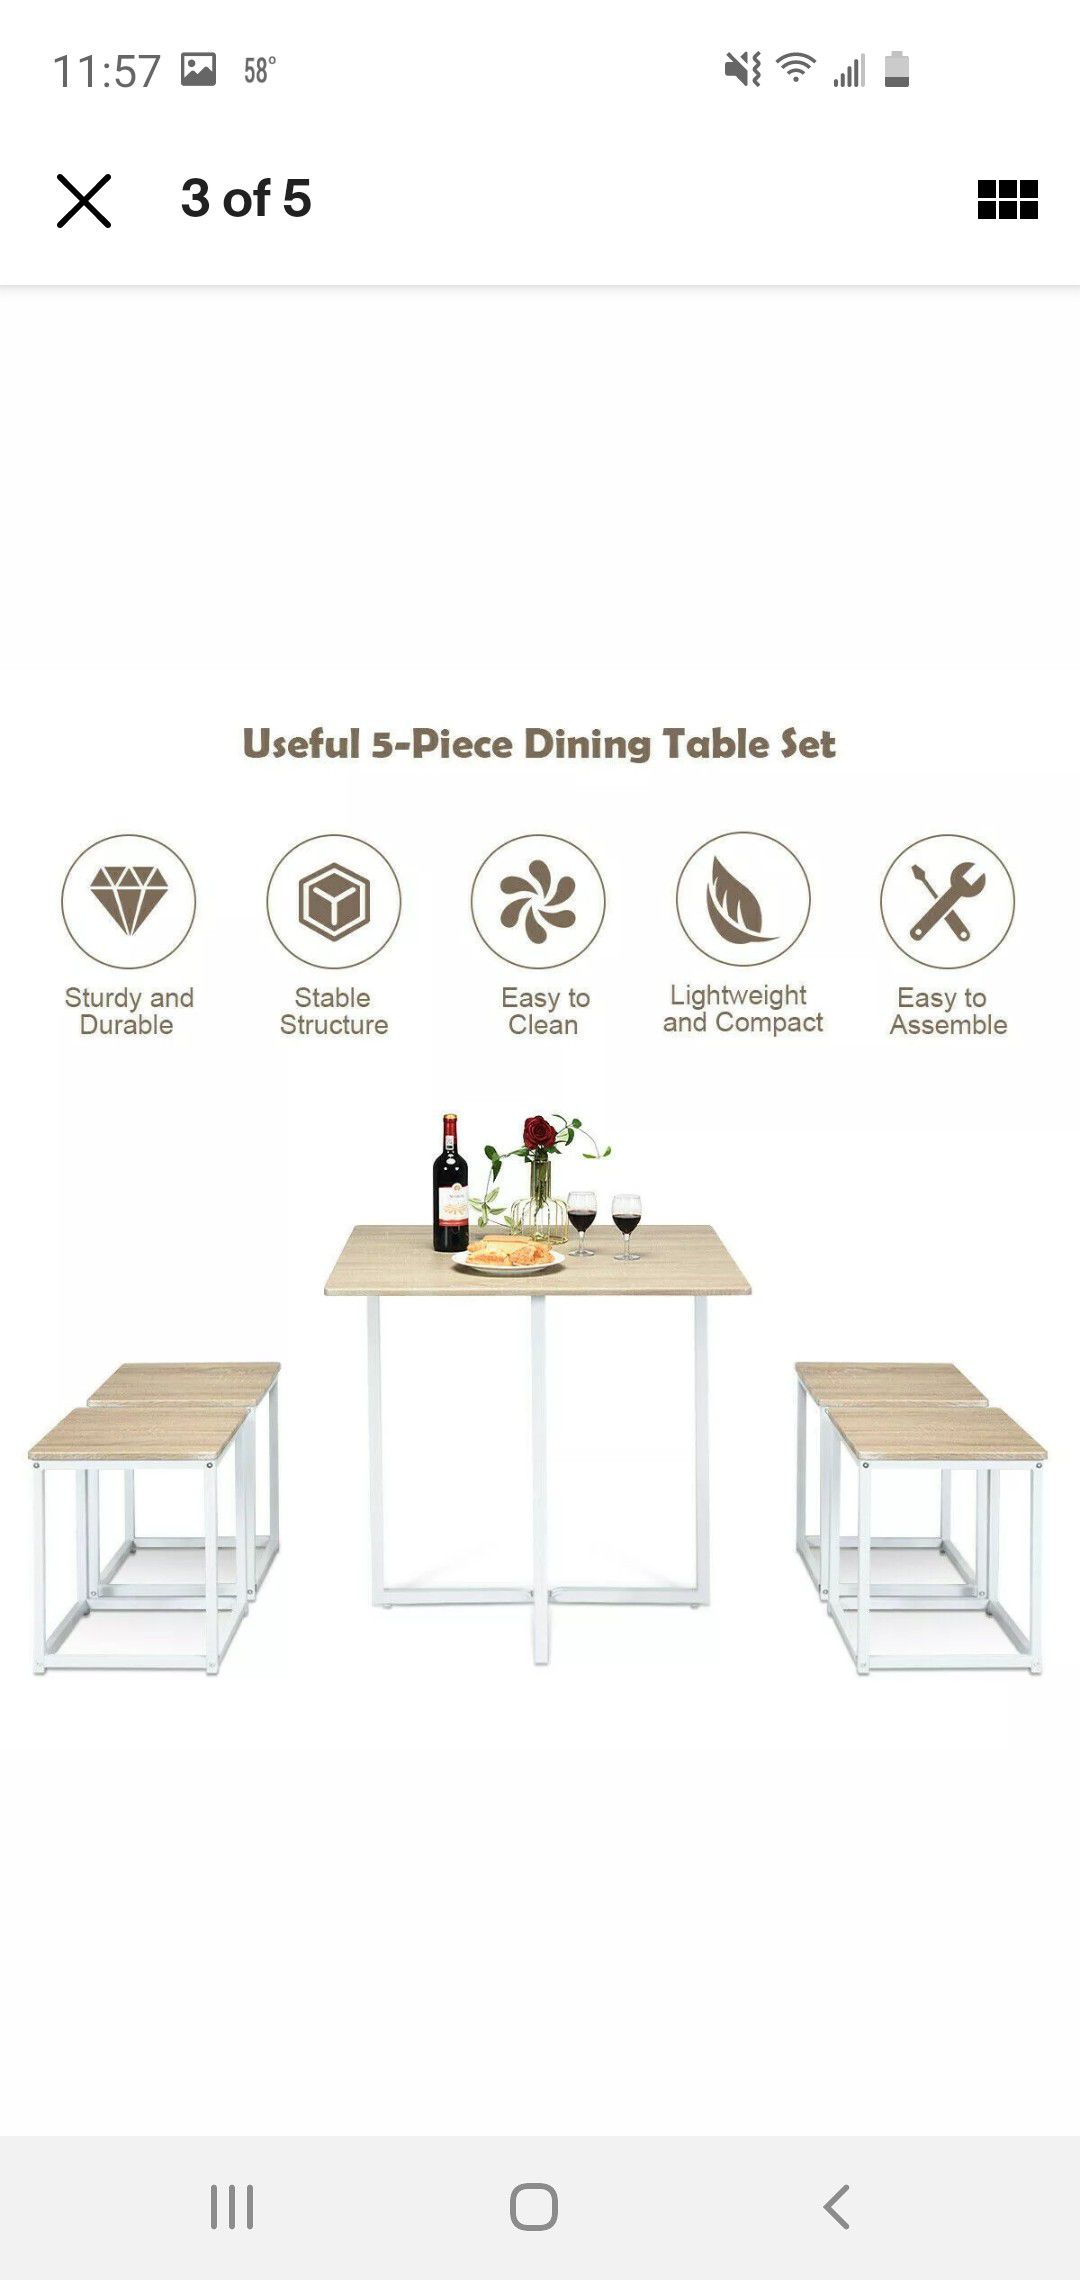 5 pcs Dining Table And Chairs Set Compact Space Bar Social family dinners